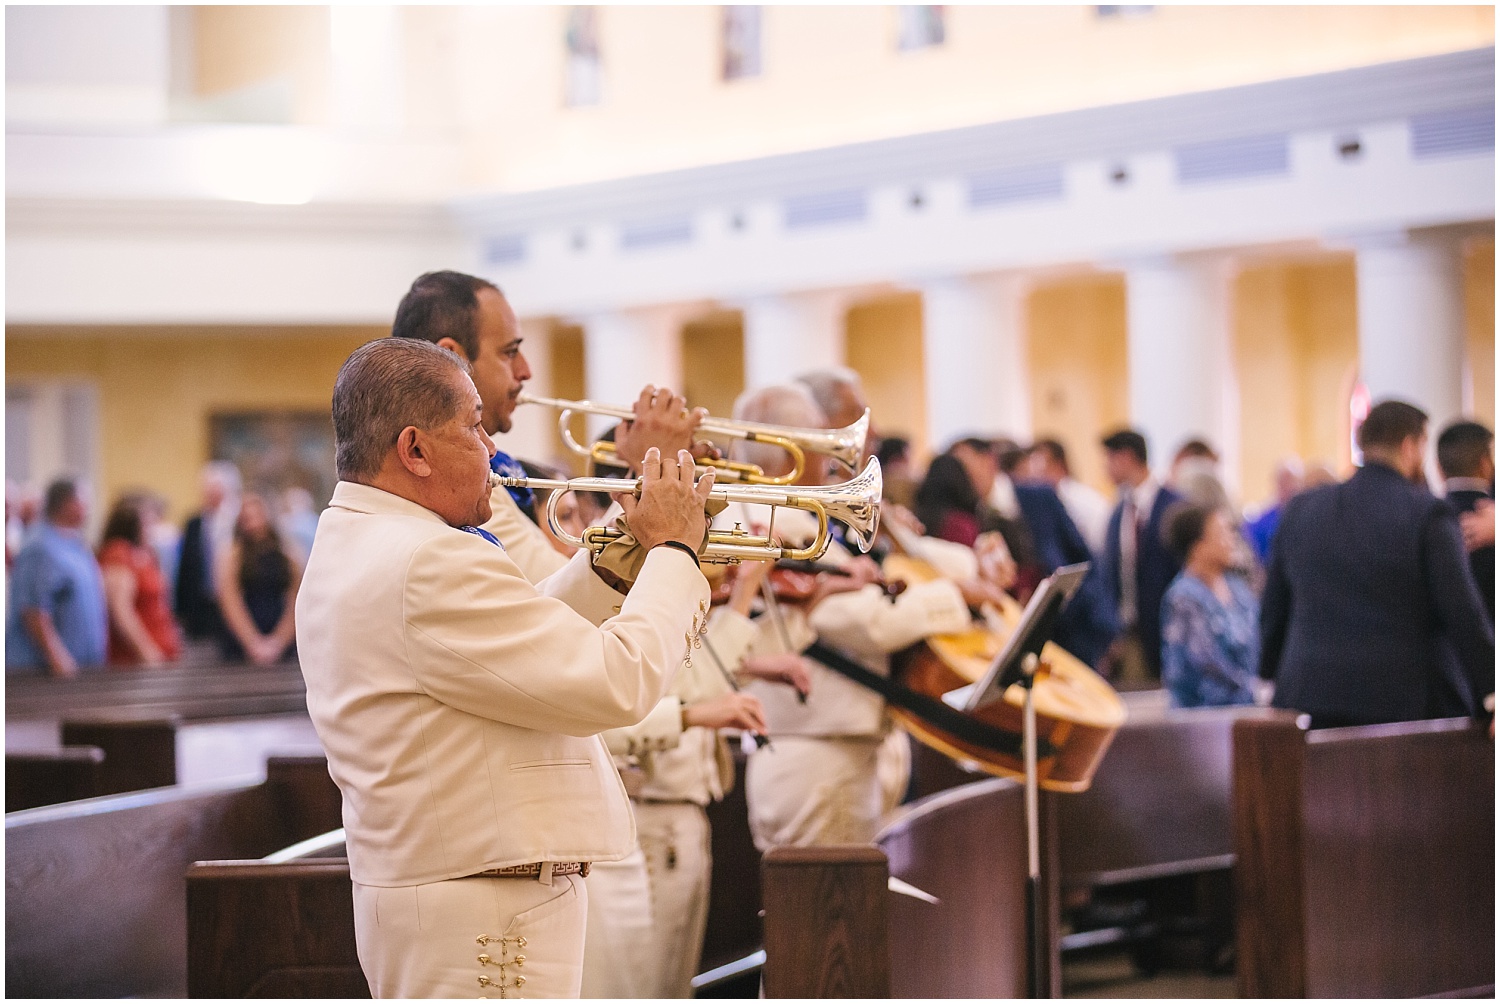 Mariachi band plays during wedding ceremony at Church of the Incarnation Catholic Church in Rio Rancho New Mexico